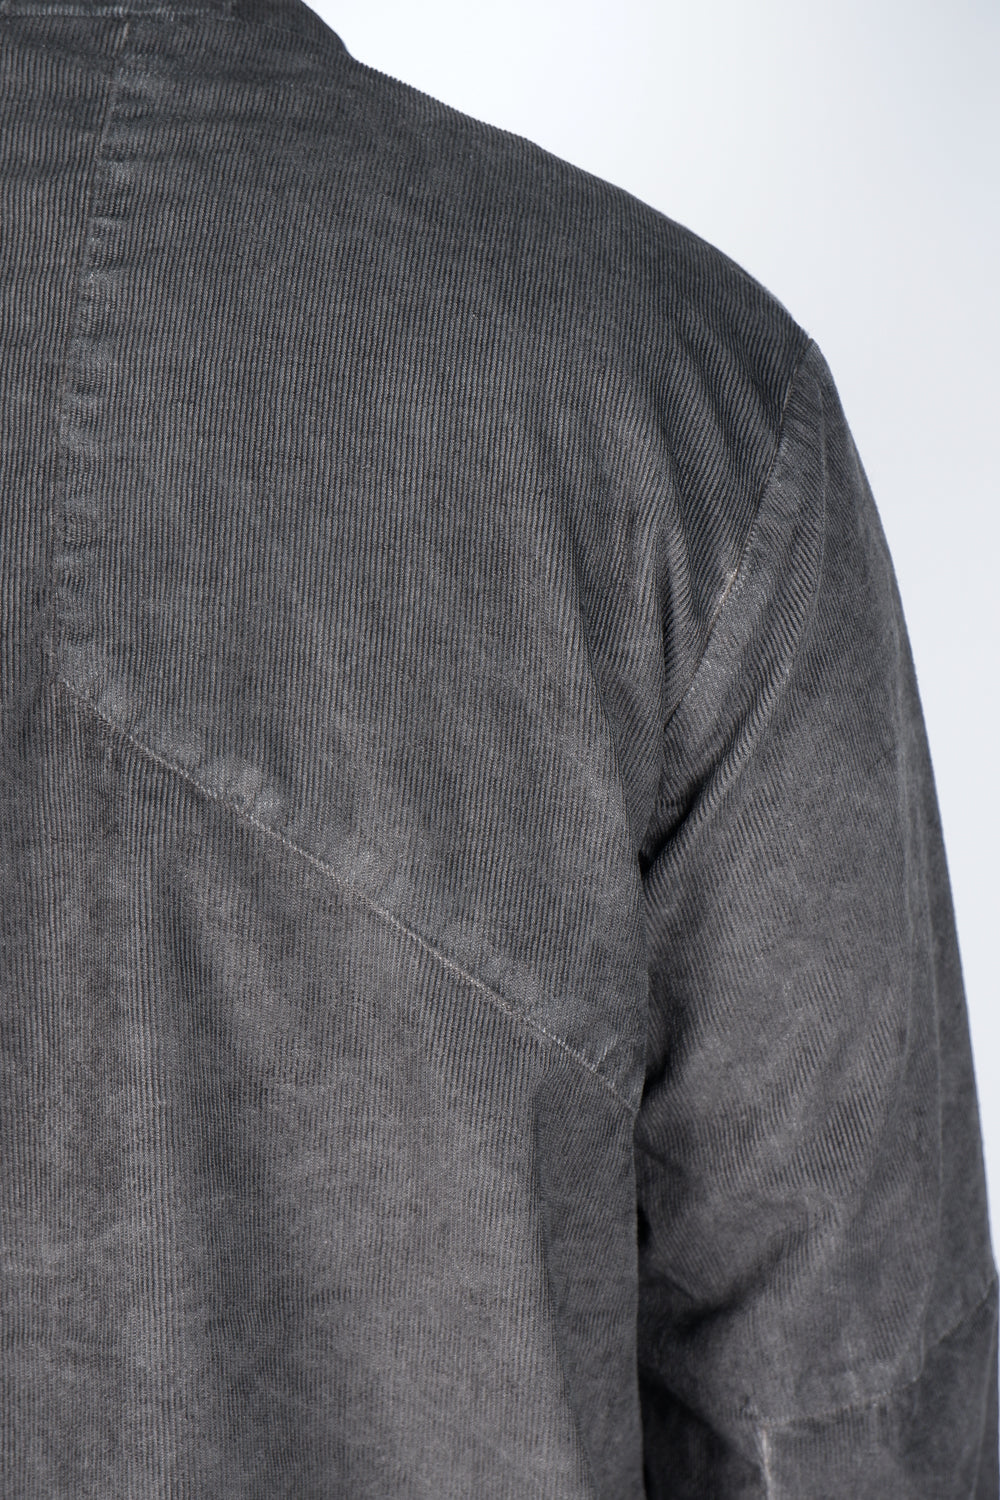 Buy the Transit Corduroy Jacket Dark Grey at Intro. Spend £50 for free UK delivery. Official stockists. We ship worldwide.